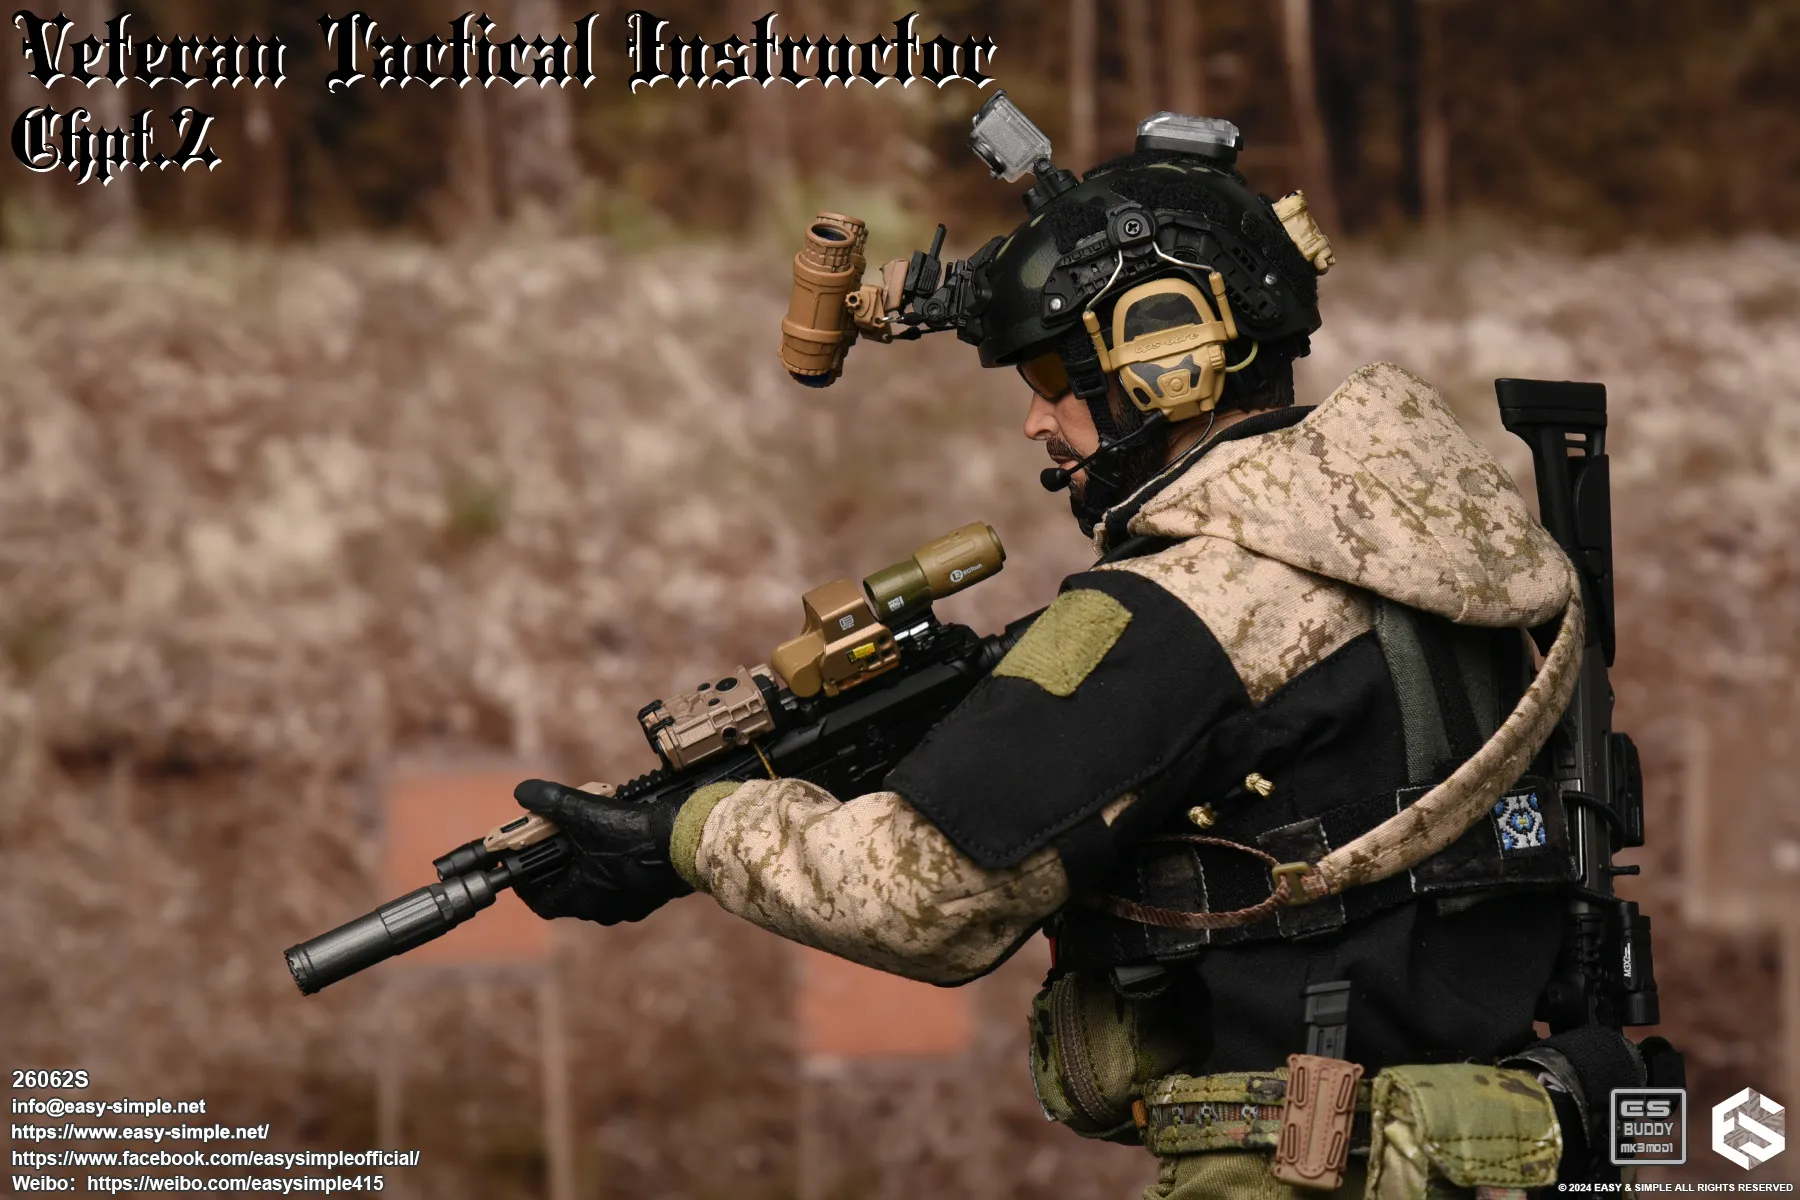 instructor - NEW PRODUCT: Easy & Simple Veteran Tactical Instructor Chapter II 26062S Format,webp